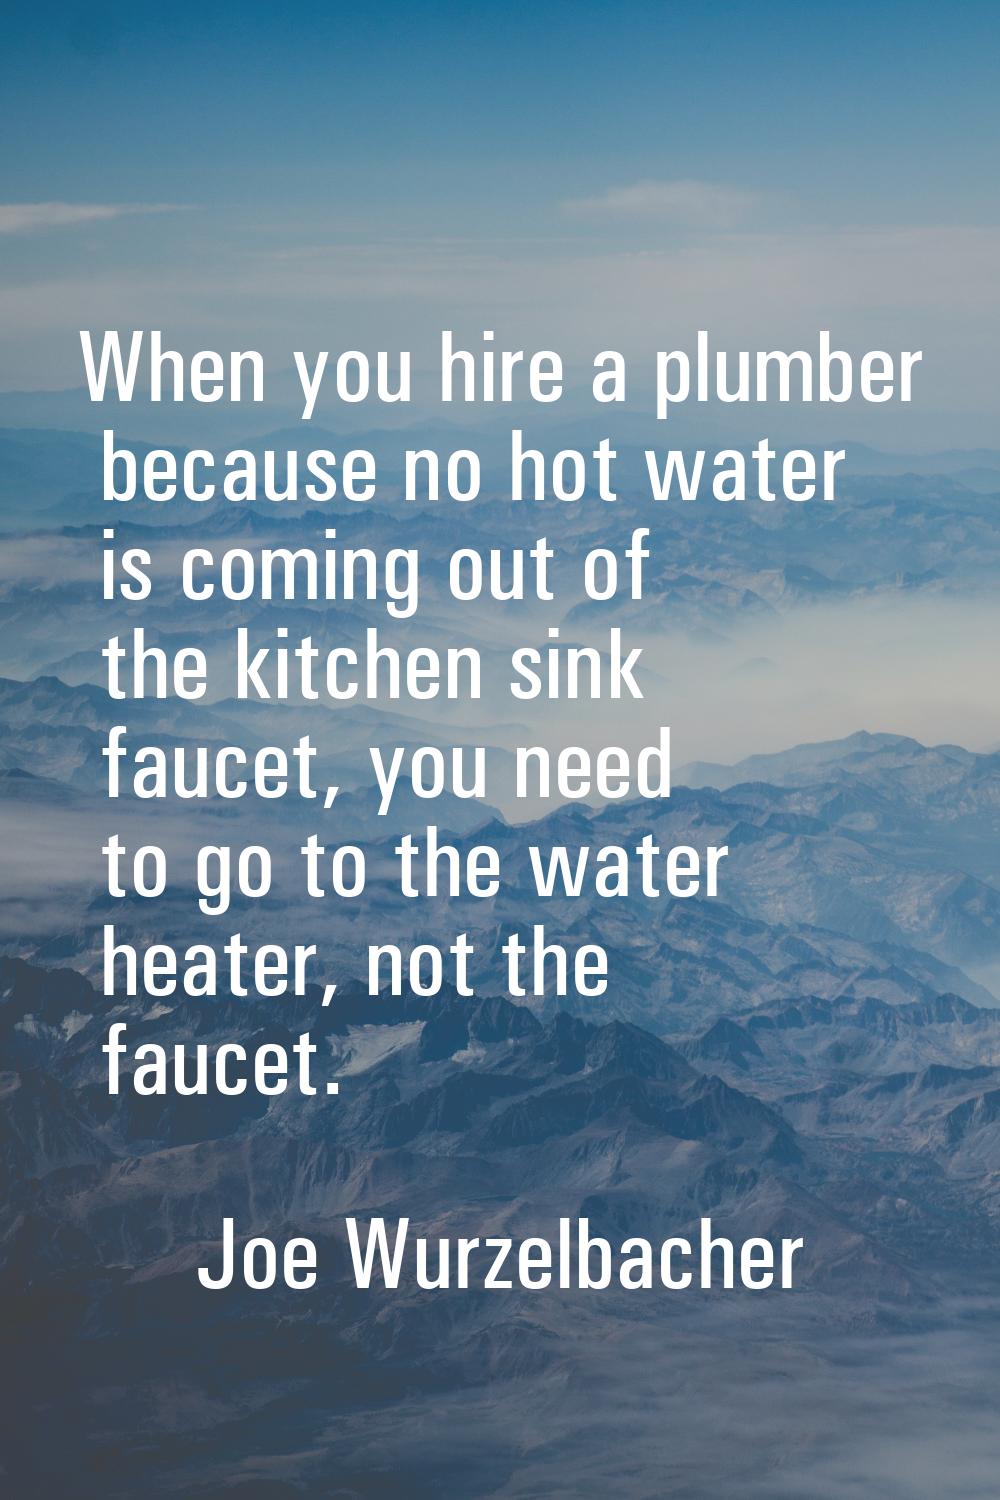 When you hire a plumber because no hot water is coming out of the kitchen sink faucet, you need to 